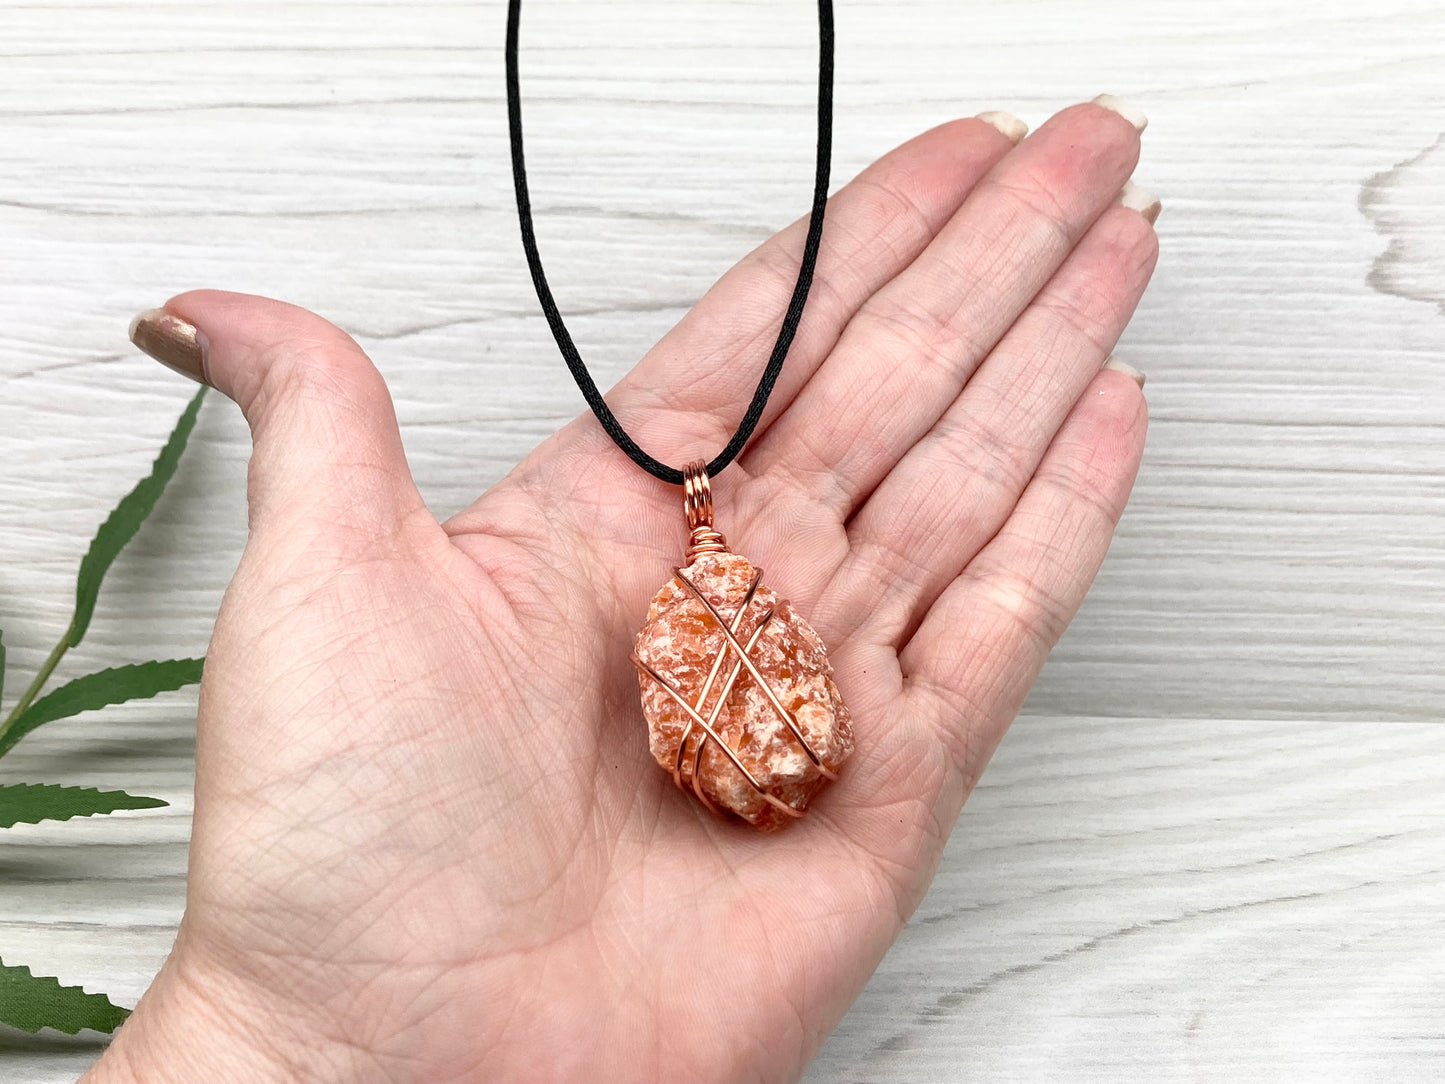 Raw Orange Calcite Necklace. Natural Orange Crystal Hand Wrapped With Copper Wire. Comes On A Black Chain. Leo Zodiac Stone Pendant. New Age Metaphysical Jewelry. Fire Element Gemstone. Pendant 1.9 X 1 Inch In Size.